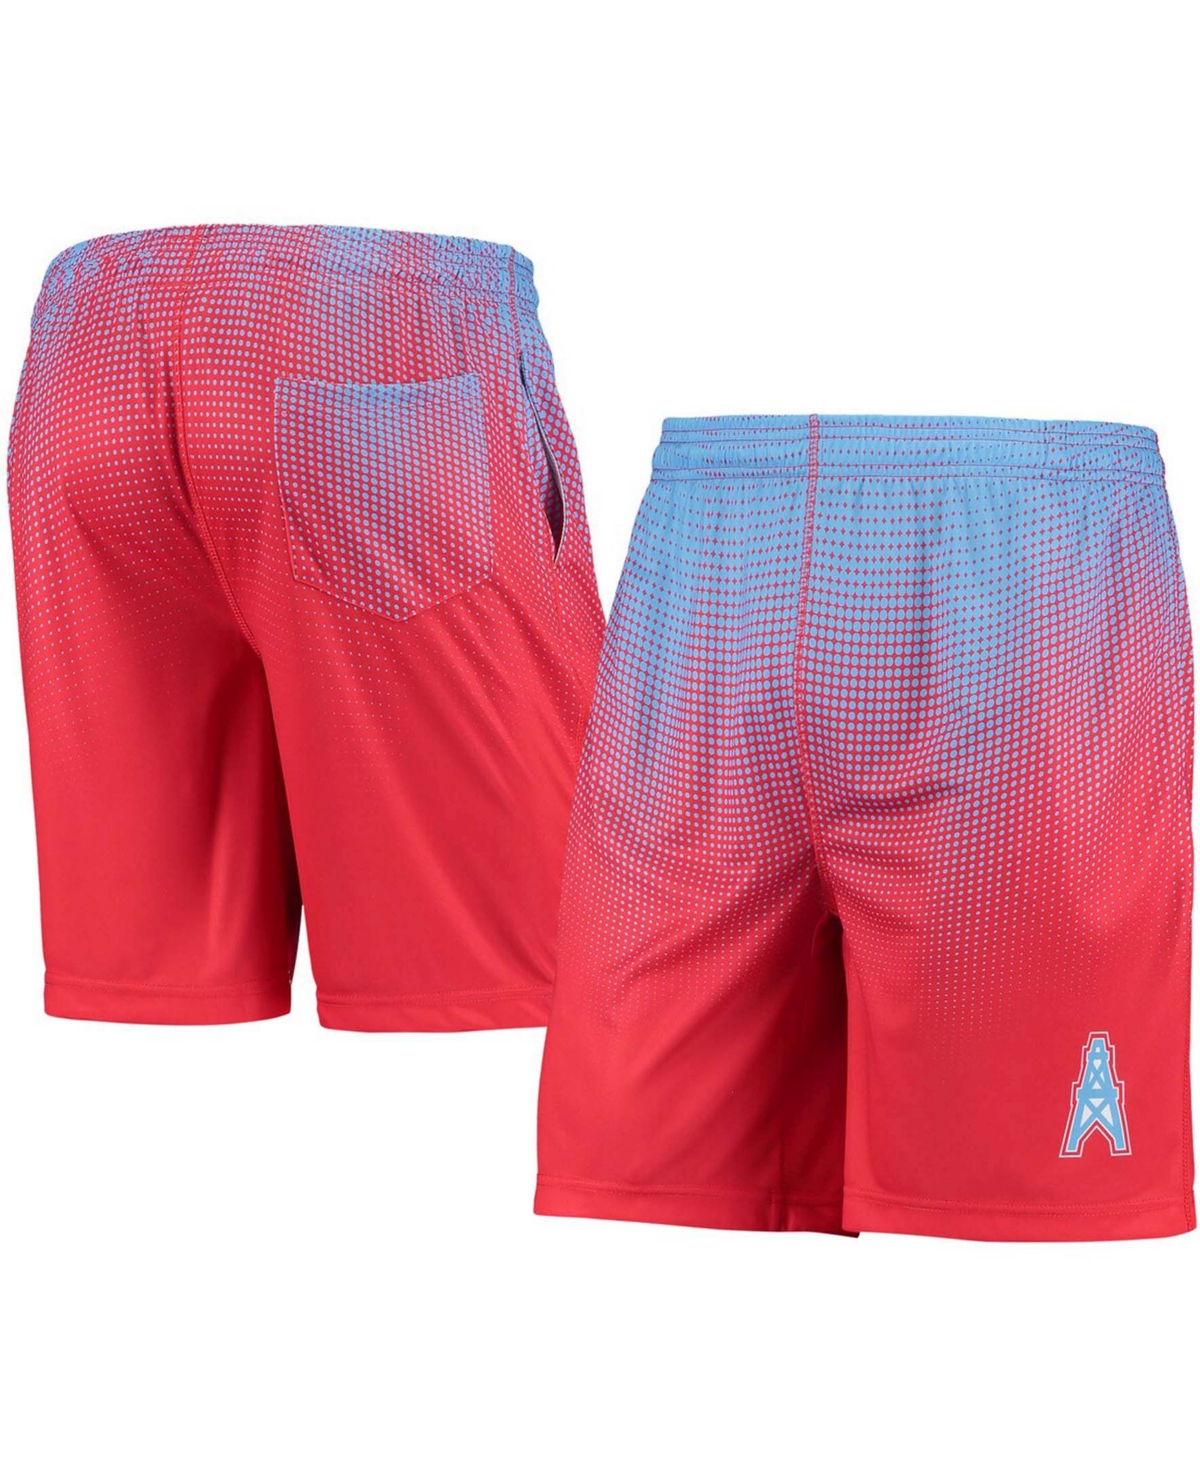 Men's Light Blue and Red Houston Oilers Gridiron Classic Pixel Gradient Training Shorts - Light Blue, Red